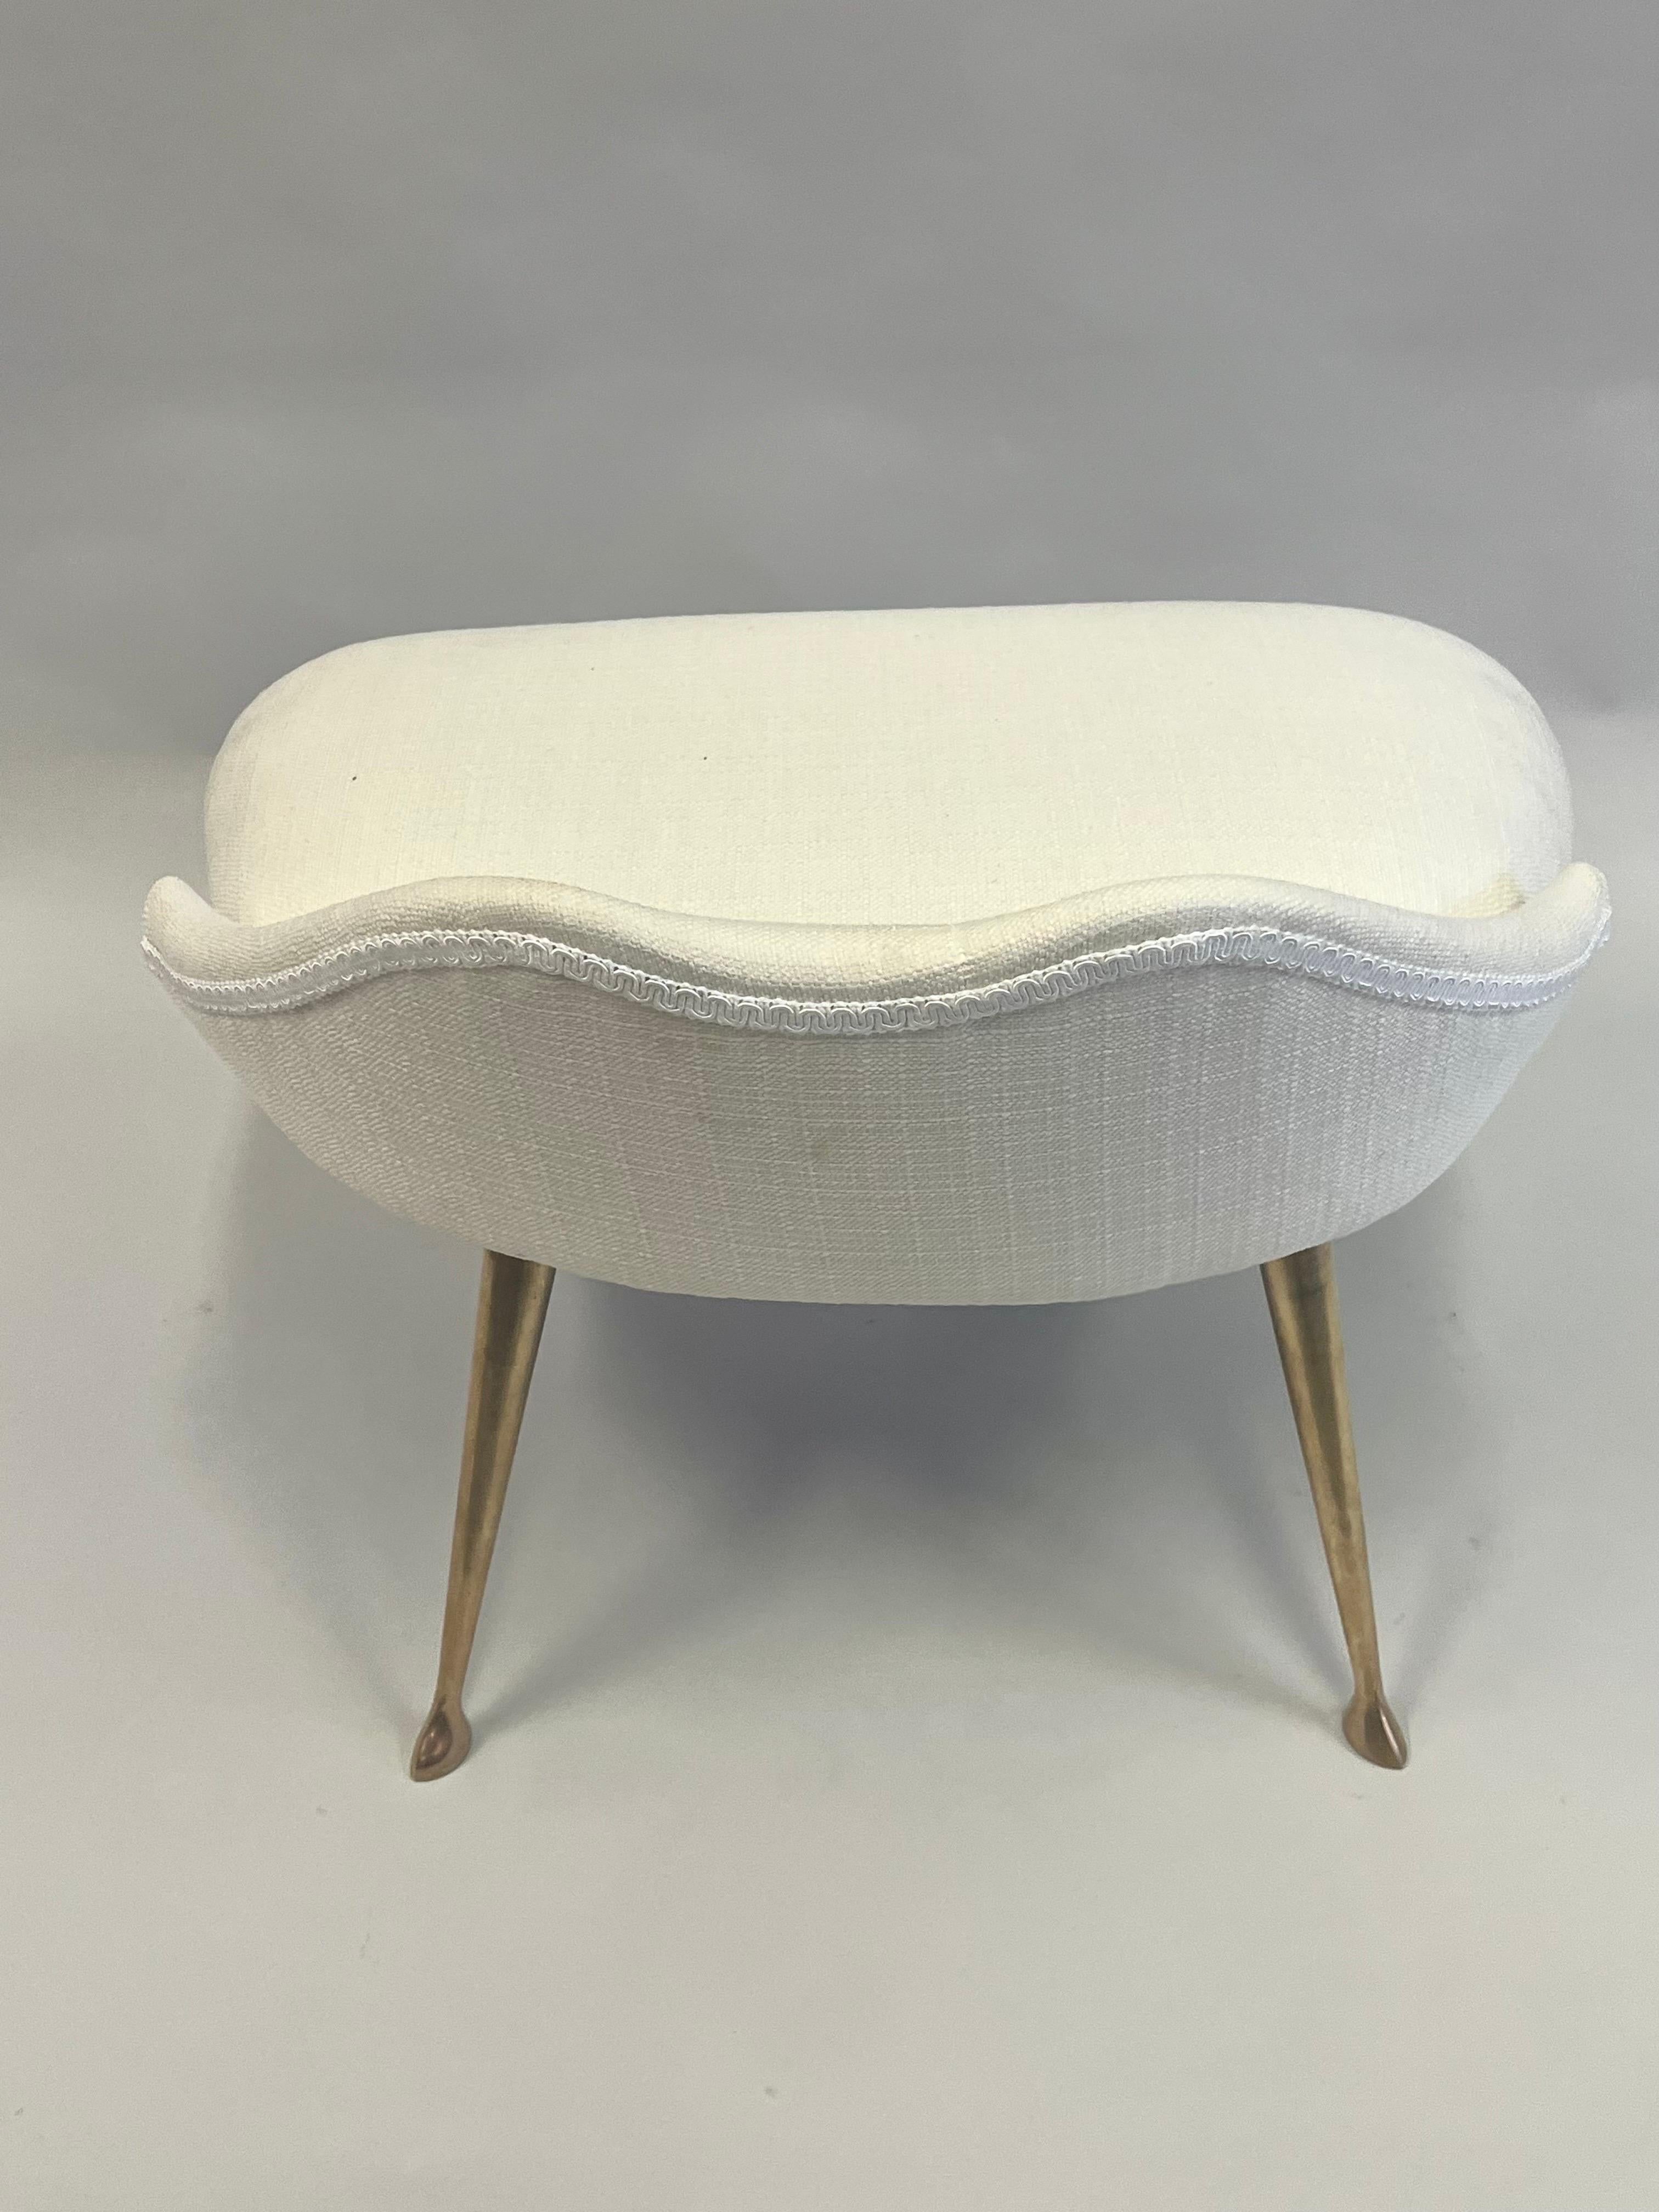 Italian Mid-CenturyModern Brass & Cotton Vanity Chair Attributed to Marco Zanuso For Sale 5